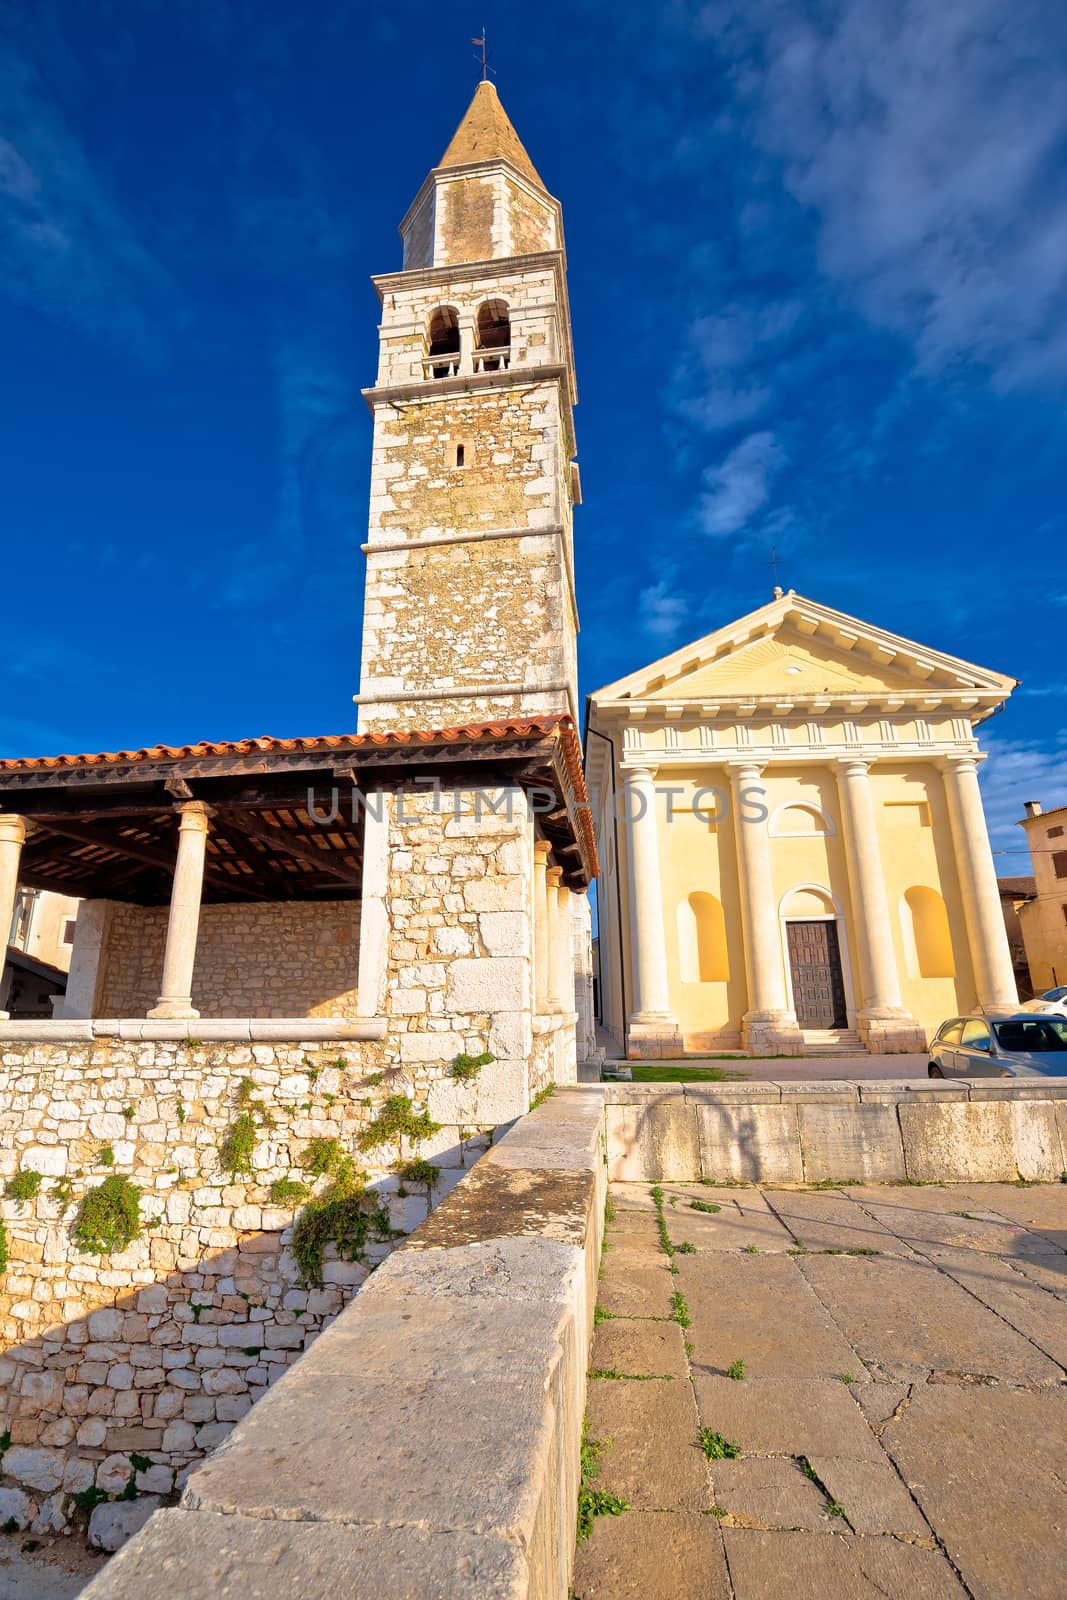 Town of Visnjan old stone square and church view, Istria region of Croatia